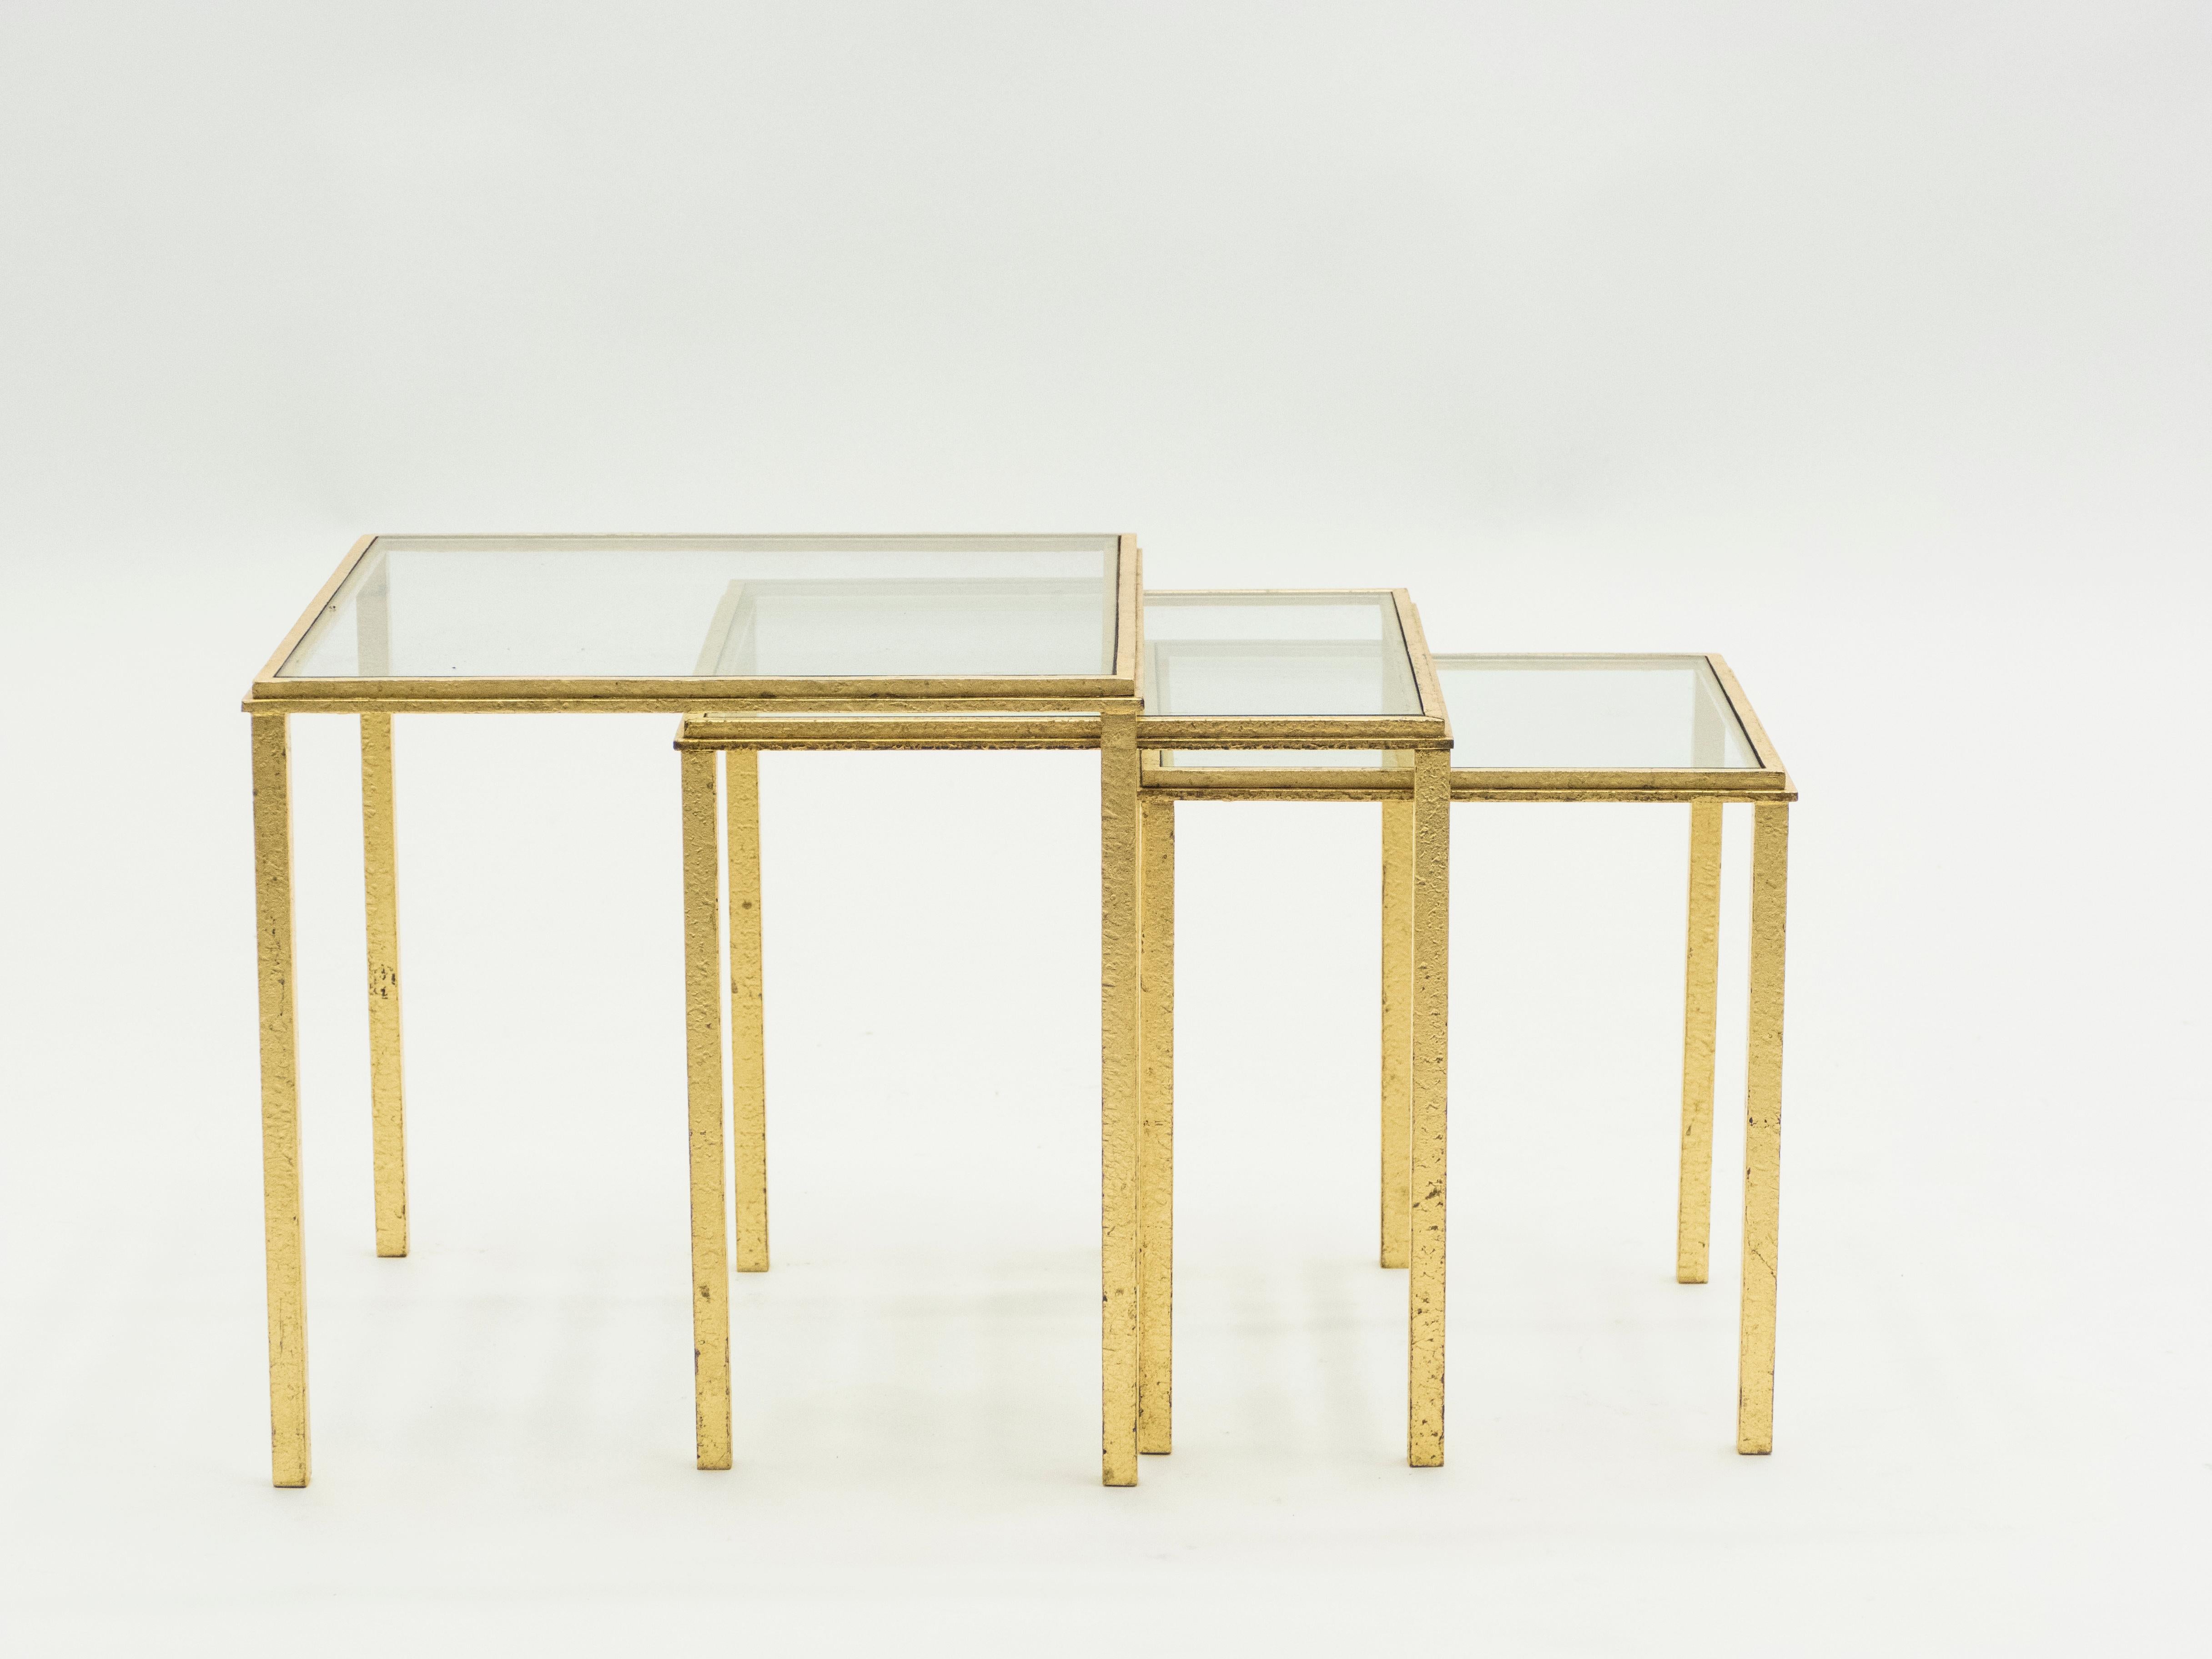 Midcentury Roger Thibier Gilt Wrought Iron Gold Leaf Nesting Tables, 1960s For Sale 5